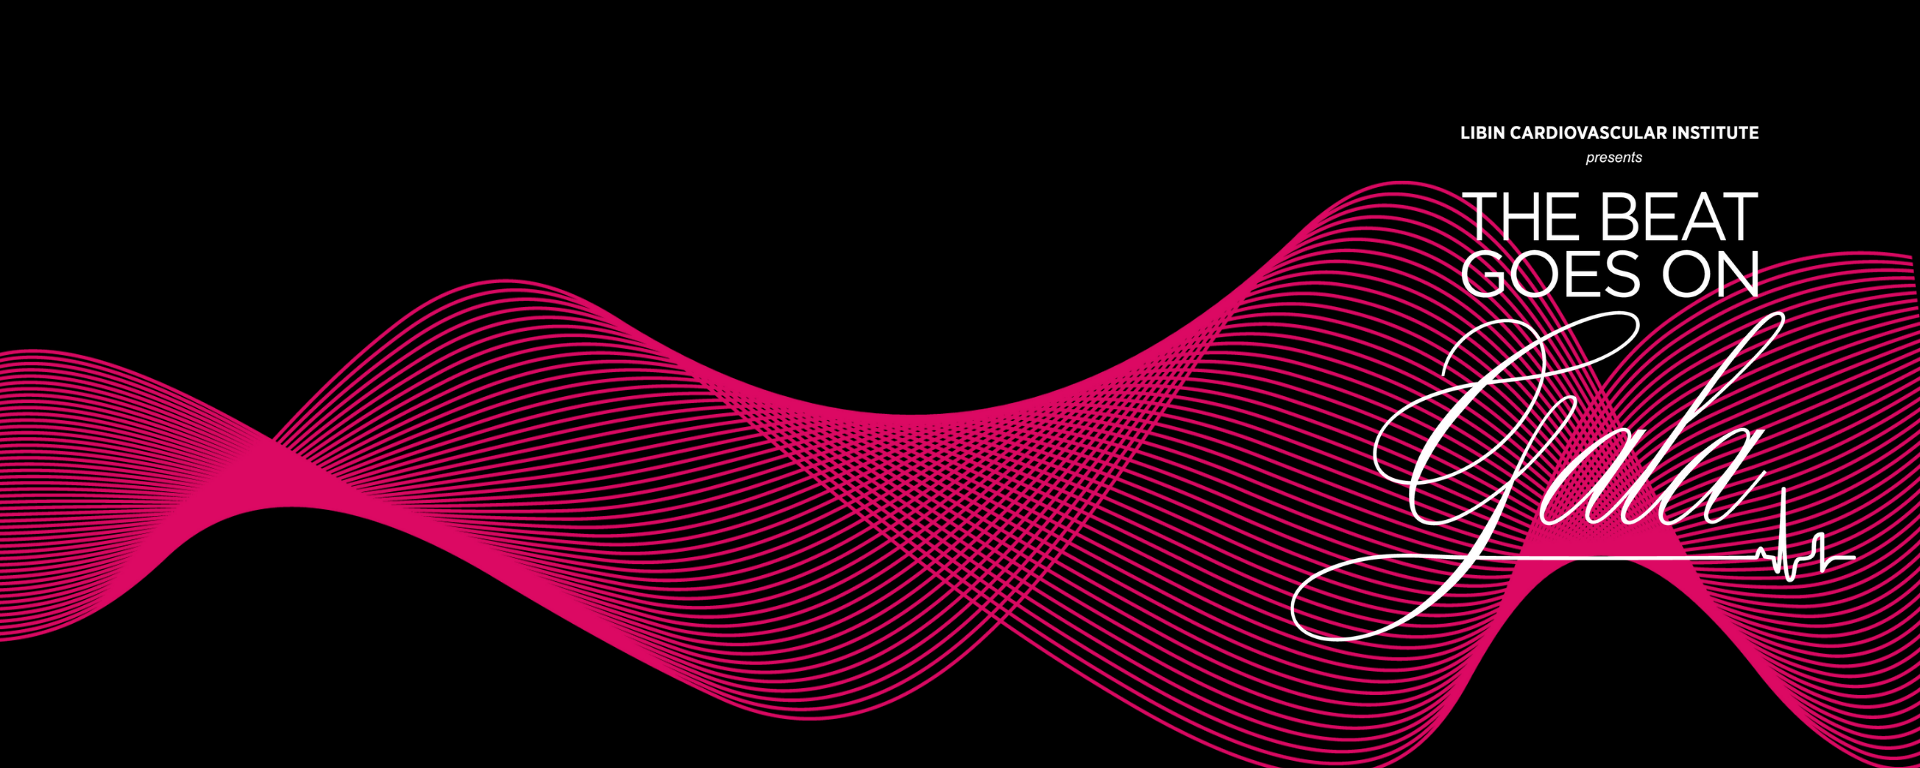 The Beat Goes on Gala logo on black and pink background